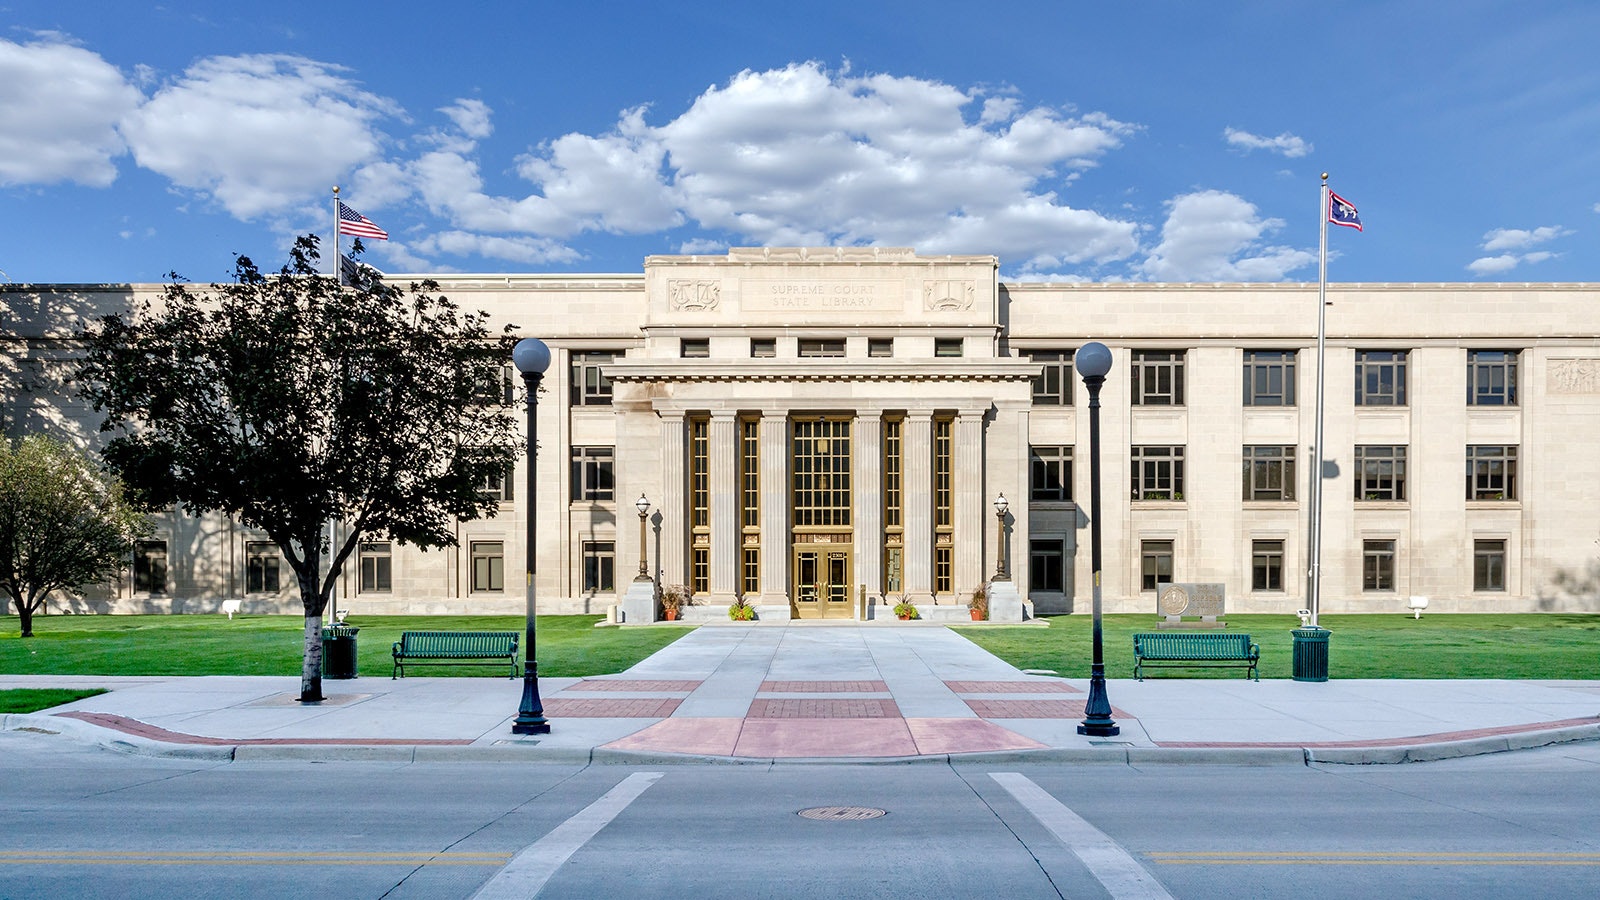 Wyoming supreme court building 5 22 23